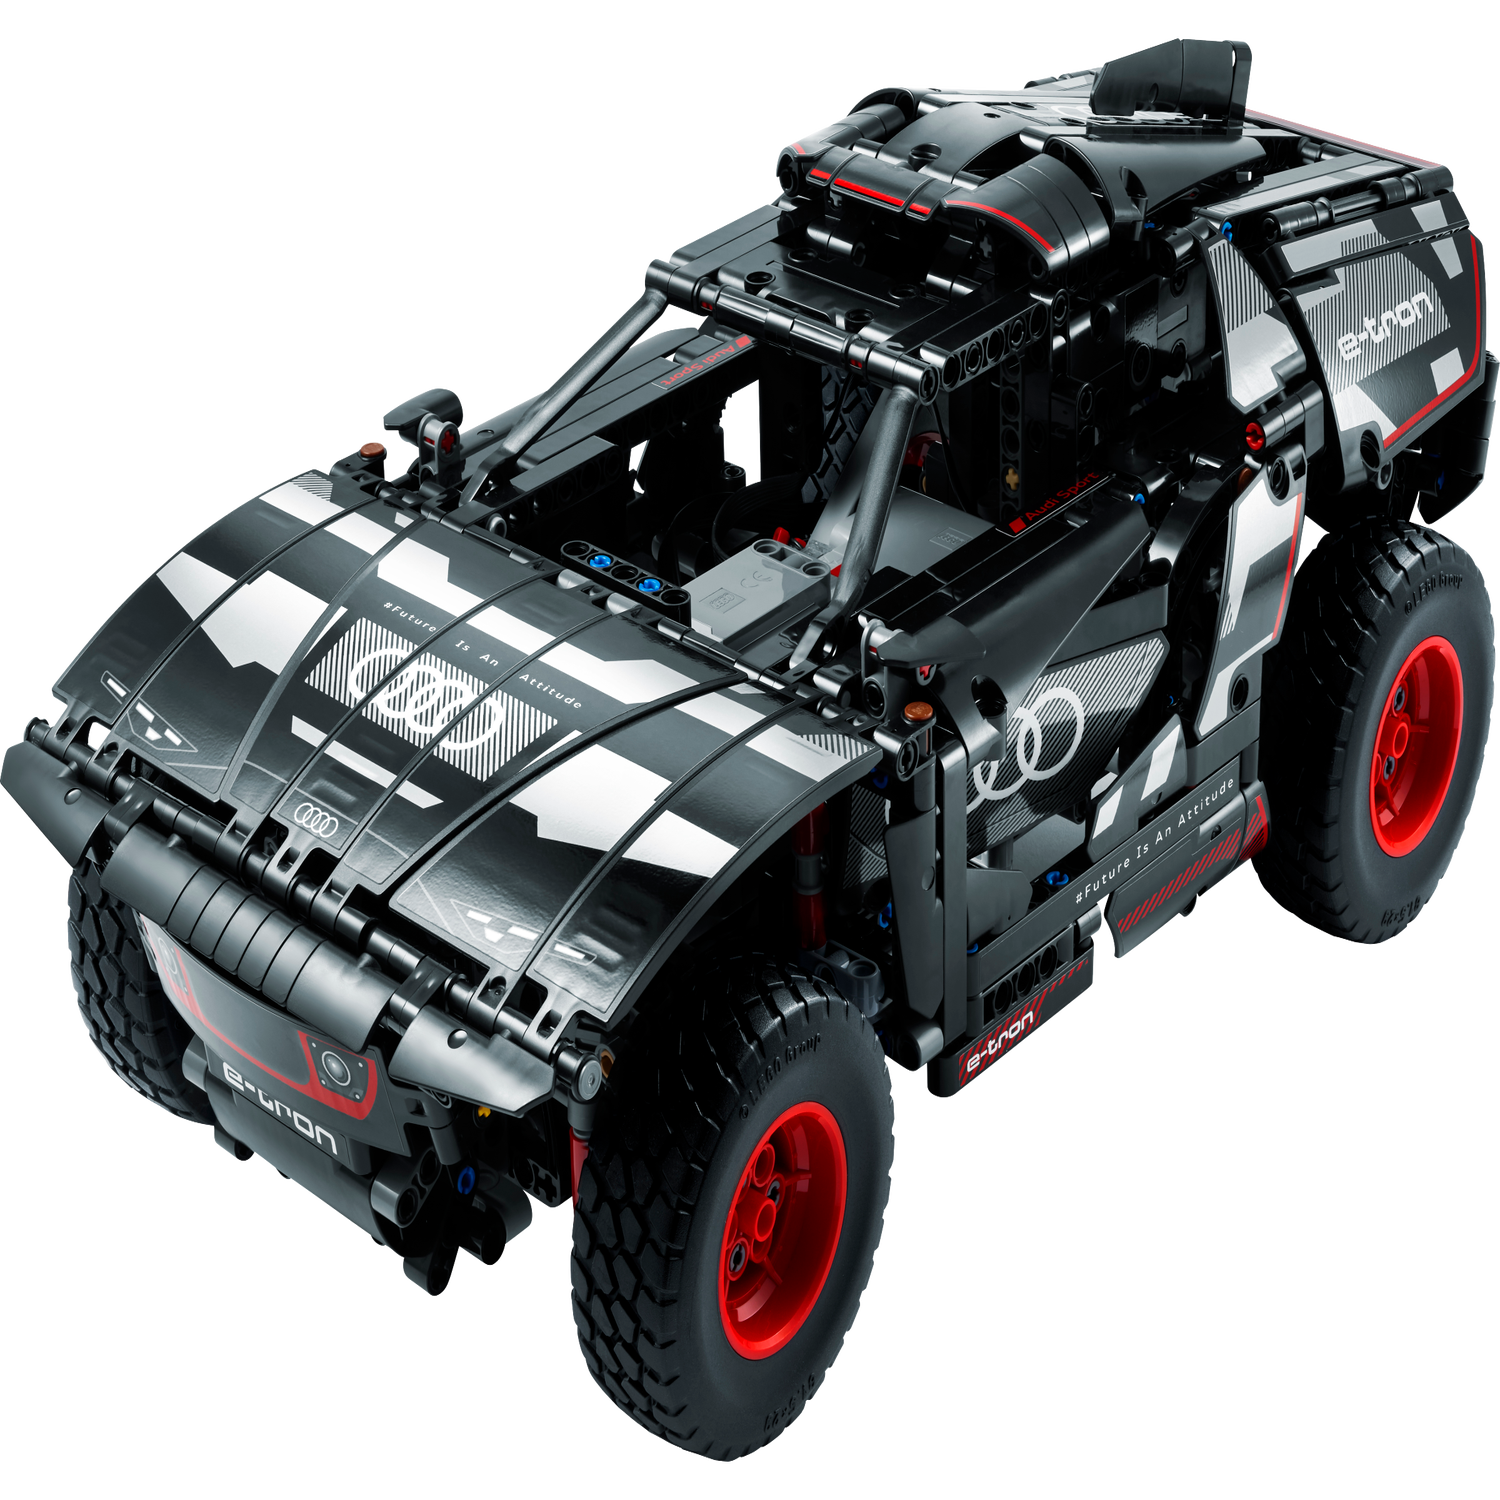 Audi S1 e-tron quattro Race Car 76921 | Speed Champions | Buy online at the  Official LEGO® Shop US